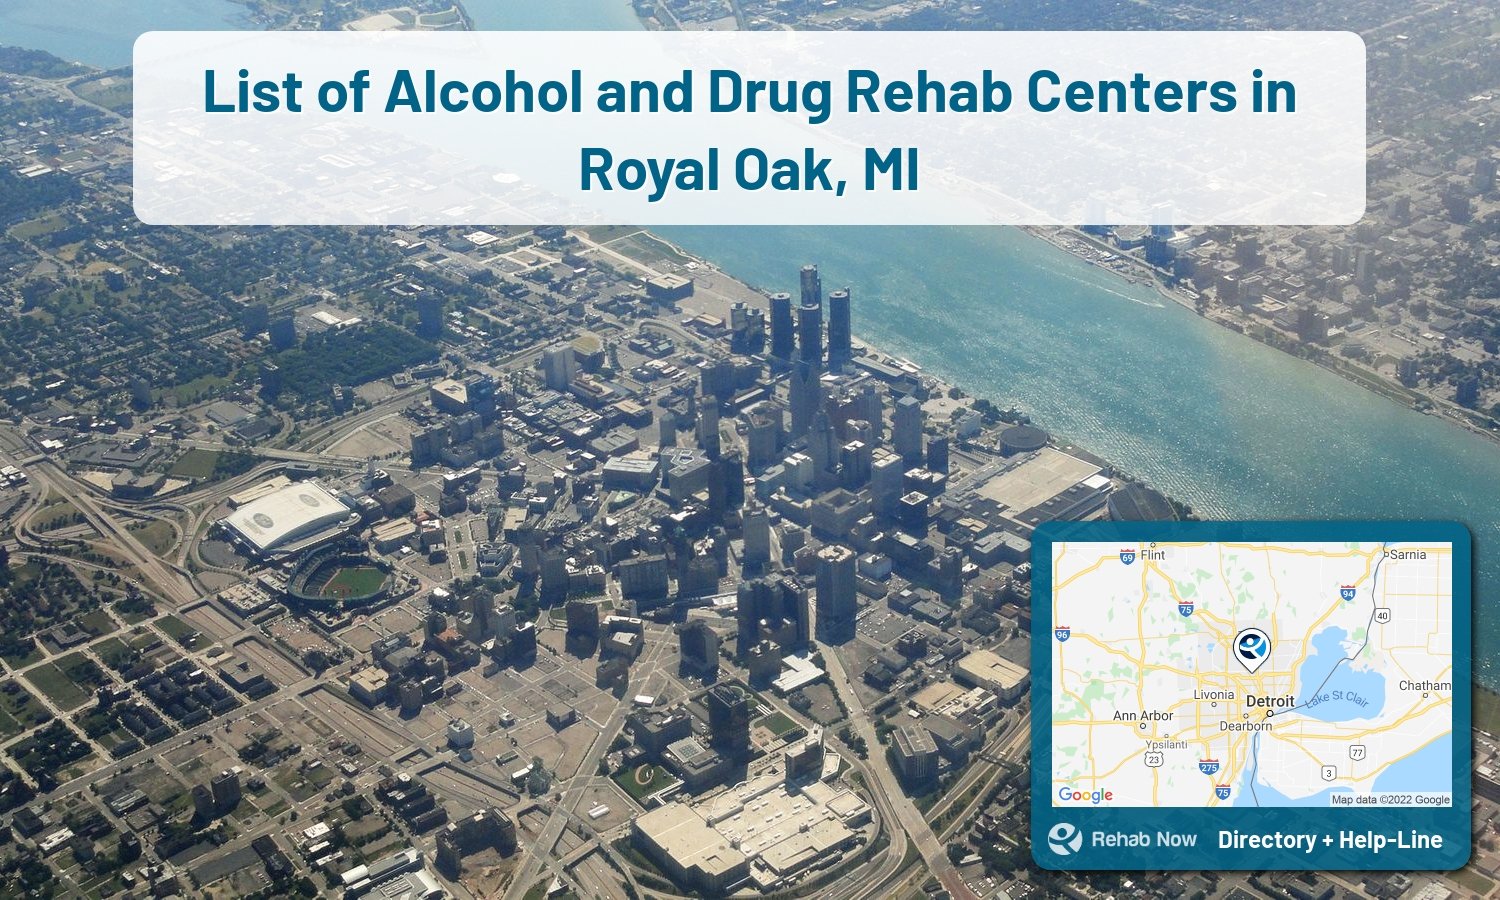 Royal Oak, MI Treatment Centers. Find drug rehab in Royal Oak, Michigan, or detox and treatment programs. Get the right help now!